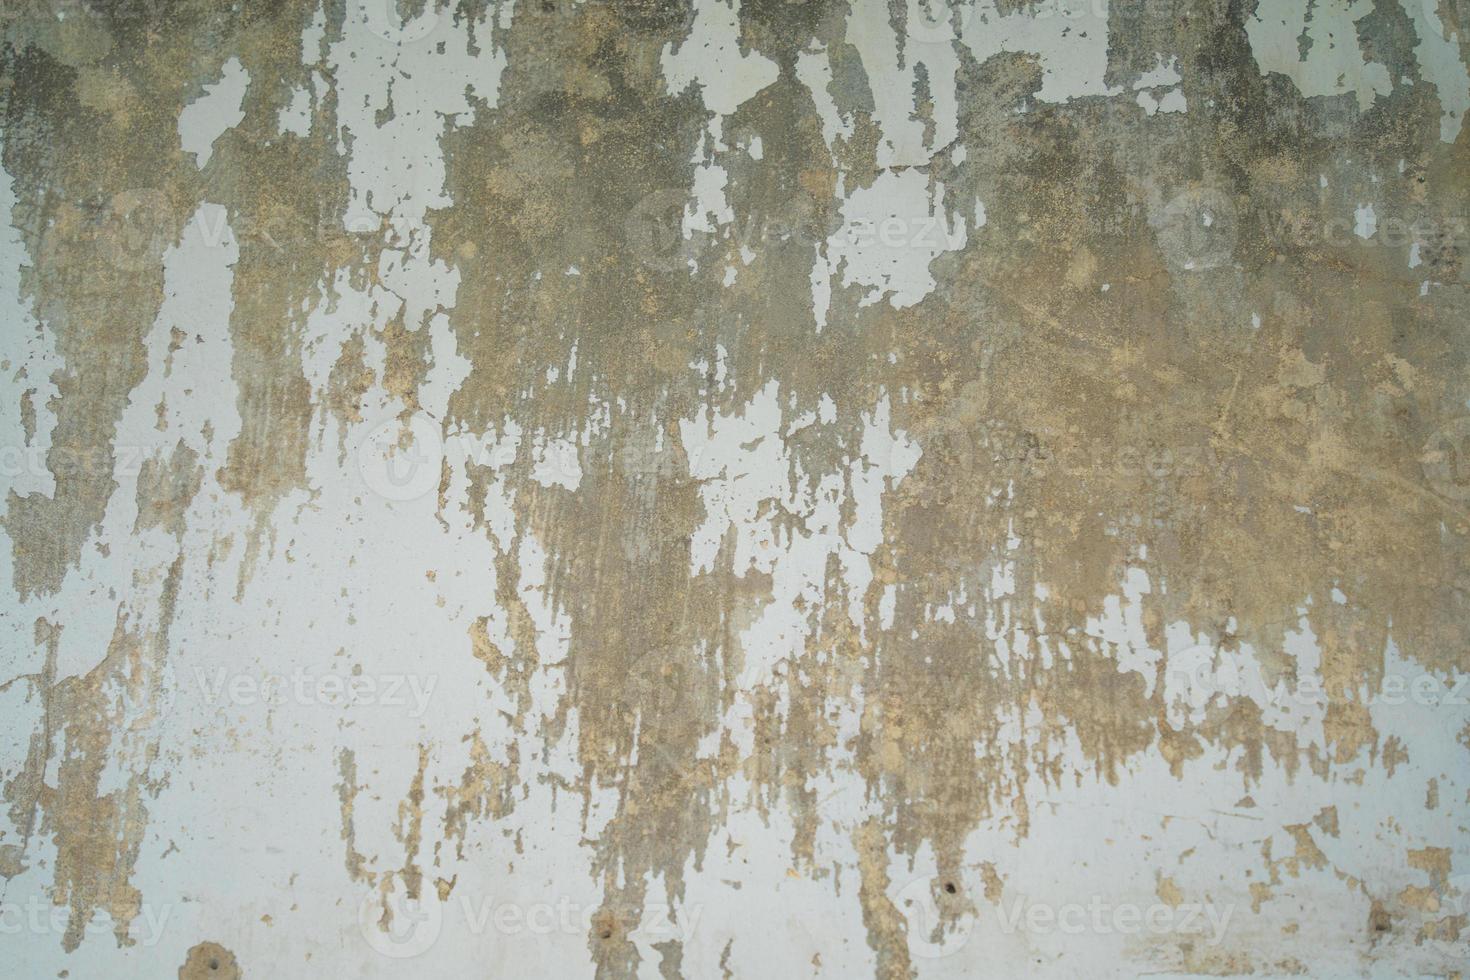 Texture of old gray concrete wall for background. Rough texture on gray wall rough form due to peeling paint layer due to rain photo